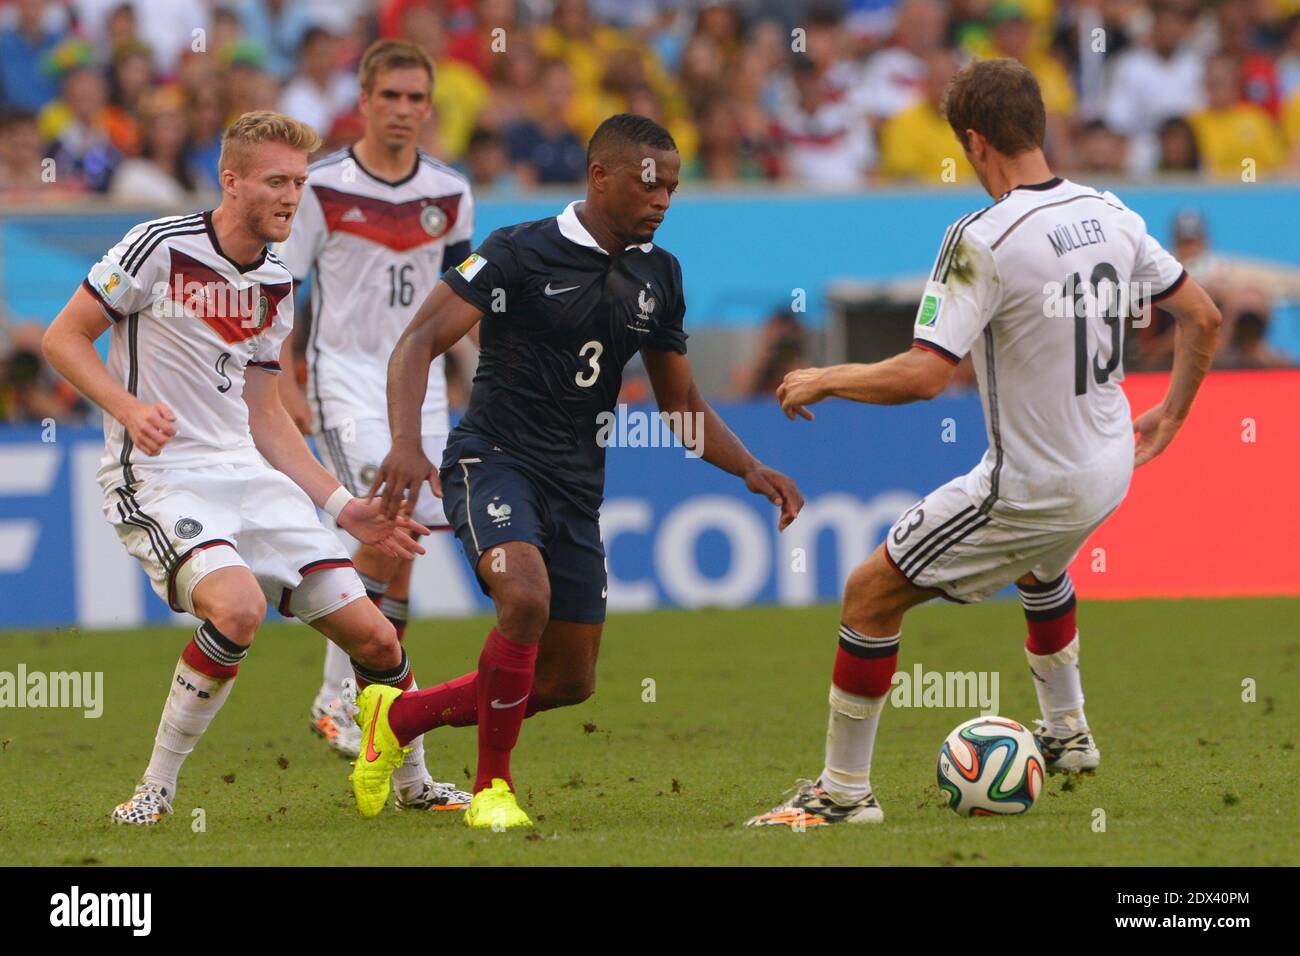 France's Antoine Griezmann and Patrice Evra battling Germany's Andre Schurrle in Soccer World Cup 2014 1/4 of Final round match France vs Germany at Maracana Stadium, Rio de Janeiro, Brazil on July 4th 2014. Germany won 1-0. Photo by Henri Szwarc/ABACAPRESS.COM Stock Photo